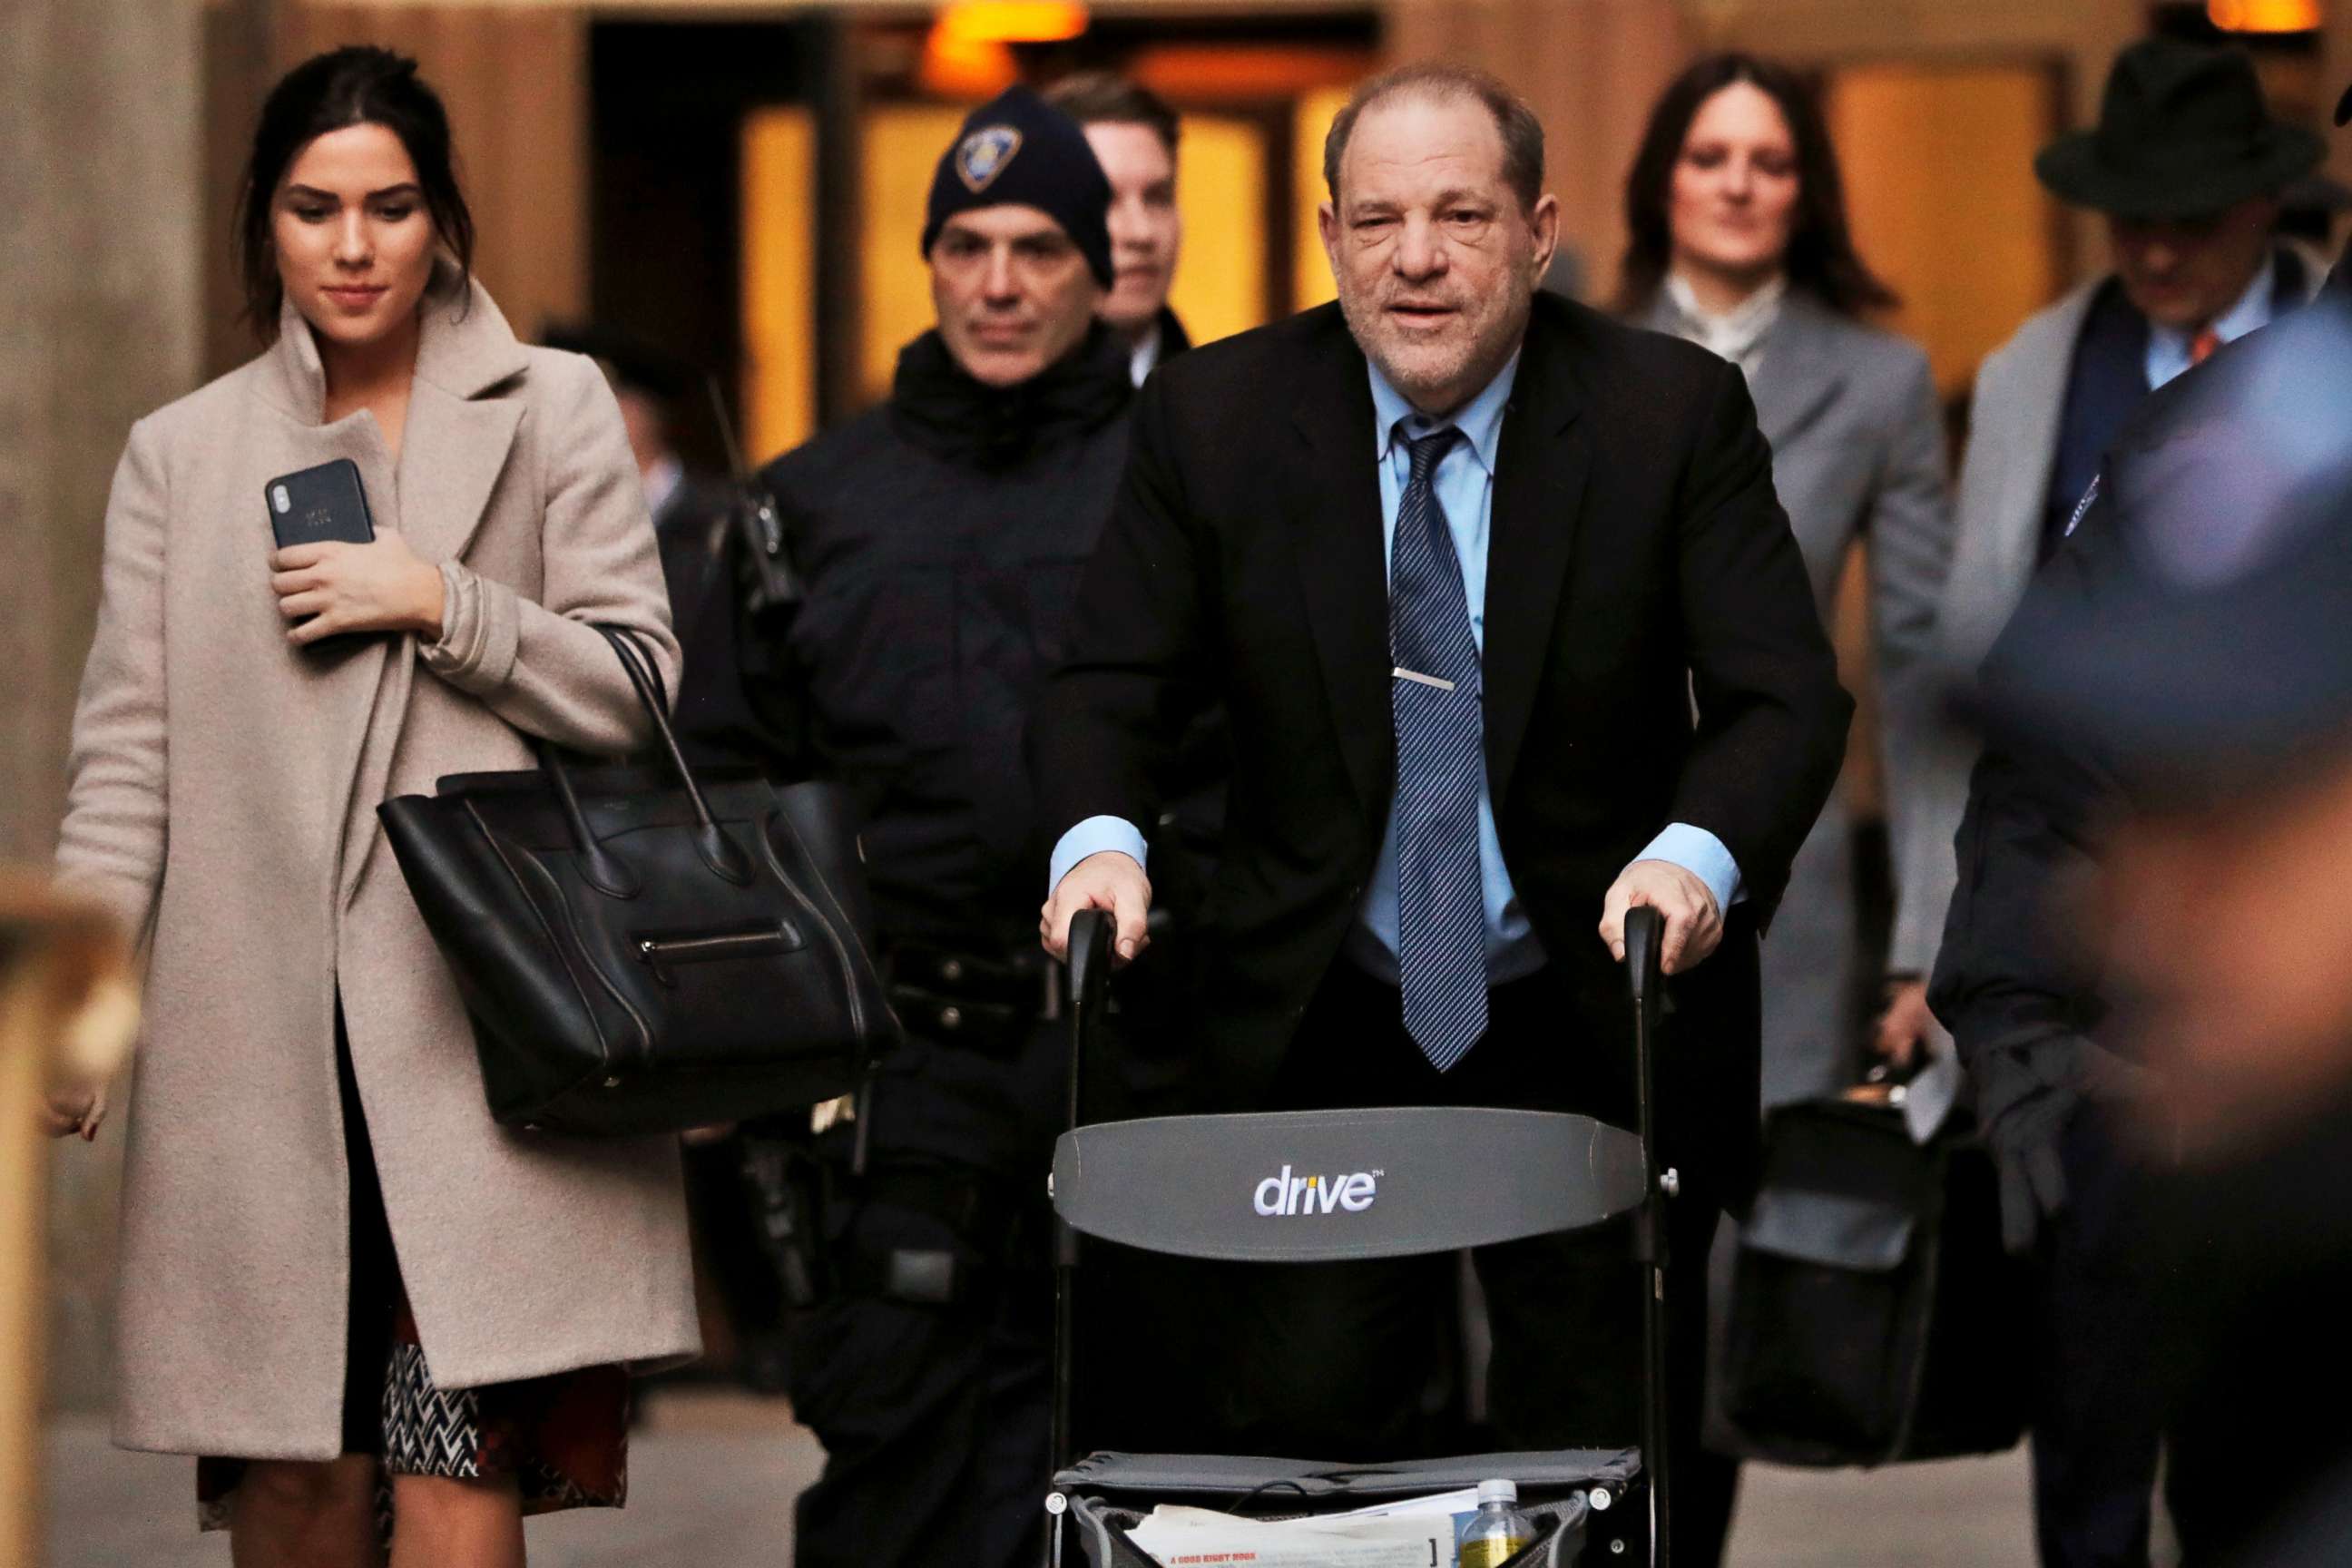 PHOTO: Harvey Weinstein leaves court after another day in a sexual assault trial at the New York State Supreme Court in Manhattan, Jan. 29, 2020.